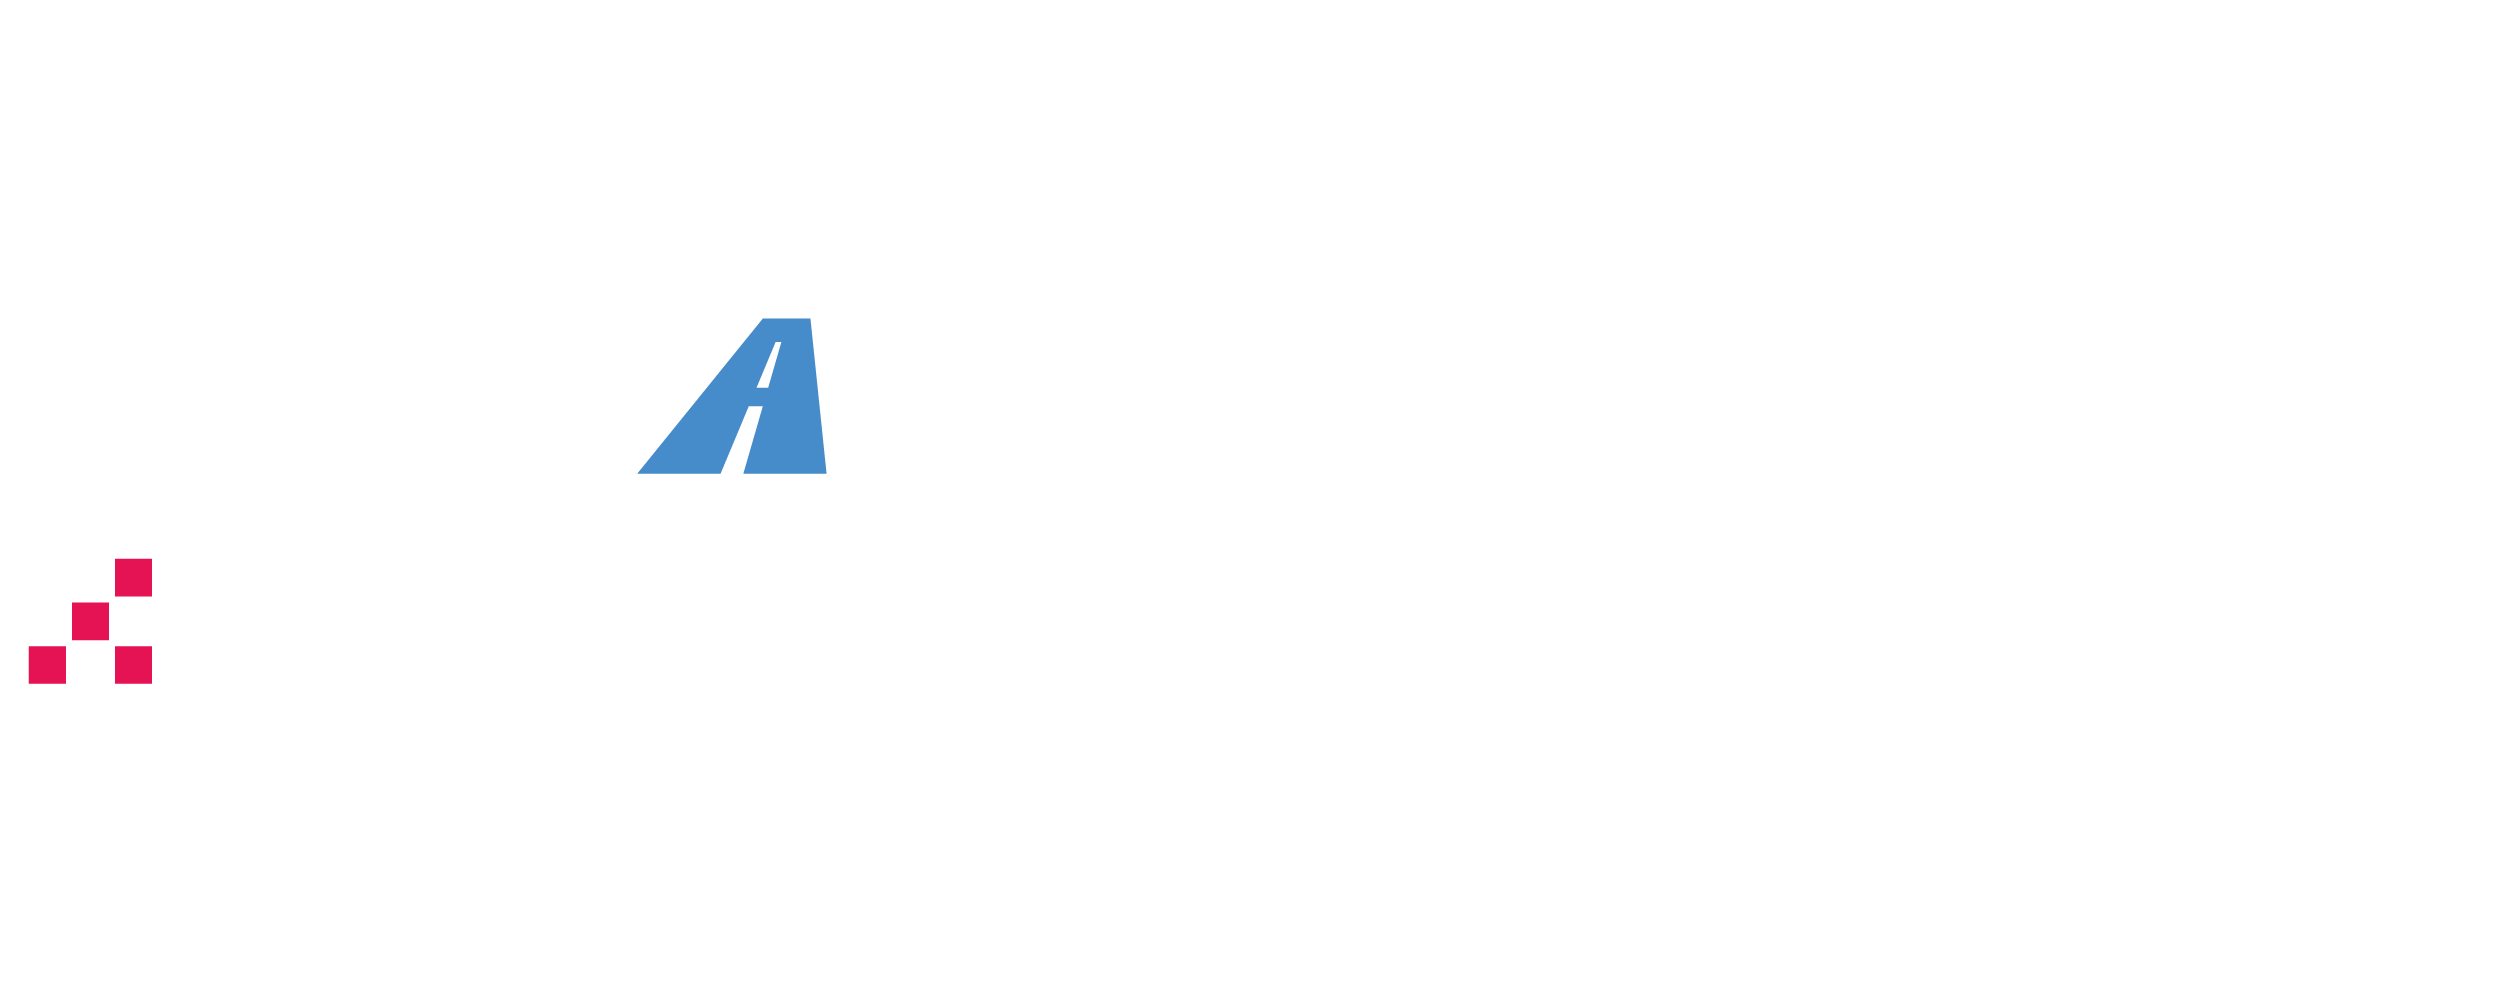 Carrier Innovation Day by sirum